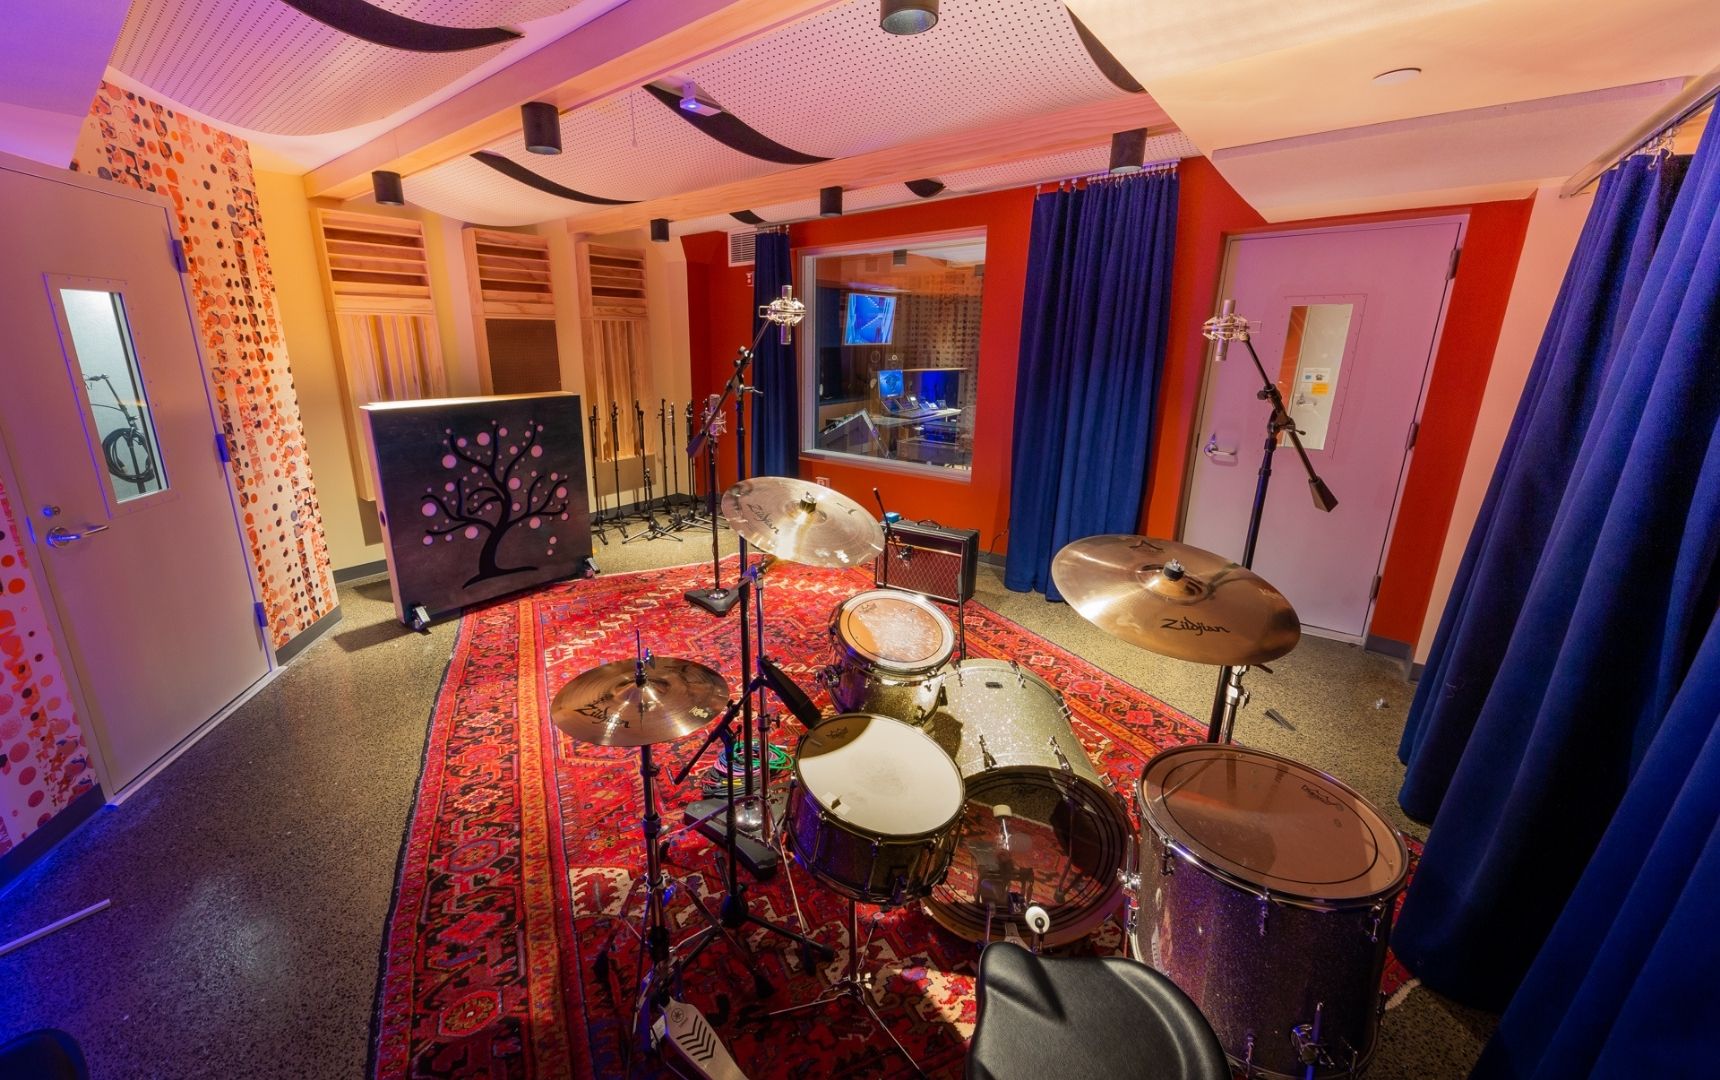 Studio B at The Record Co. - a warmly lit recording studio with a red carpet and a drum set in the center of the room. Photo by Jenny Bergman.